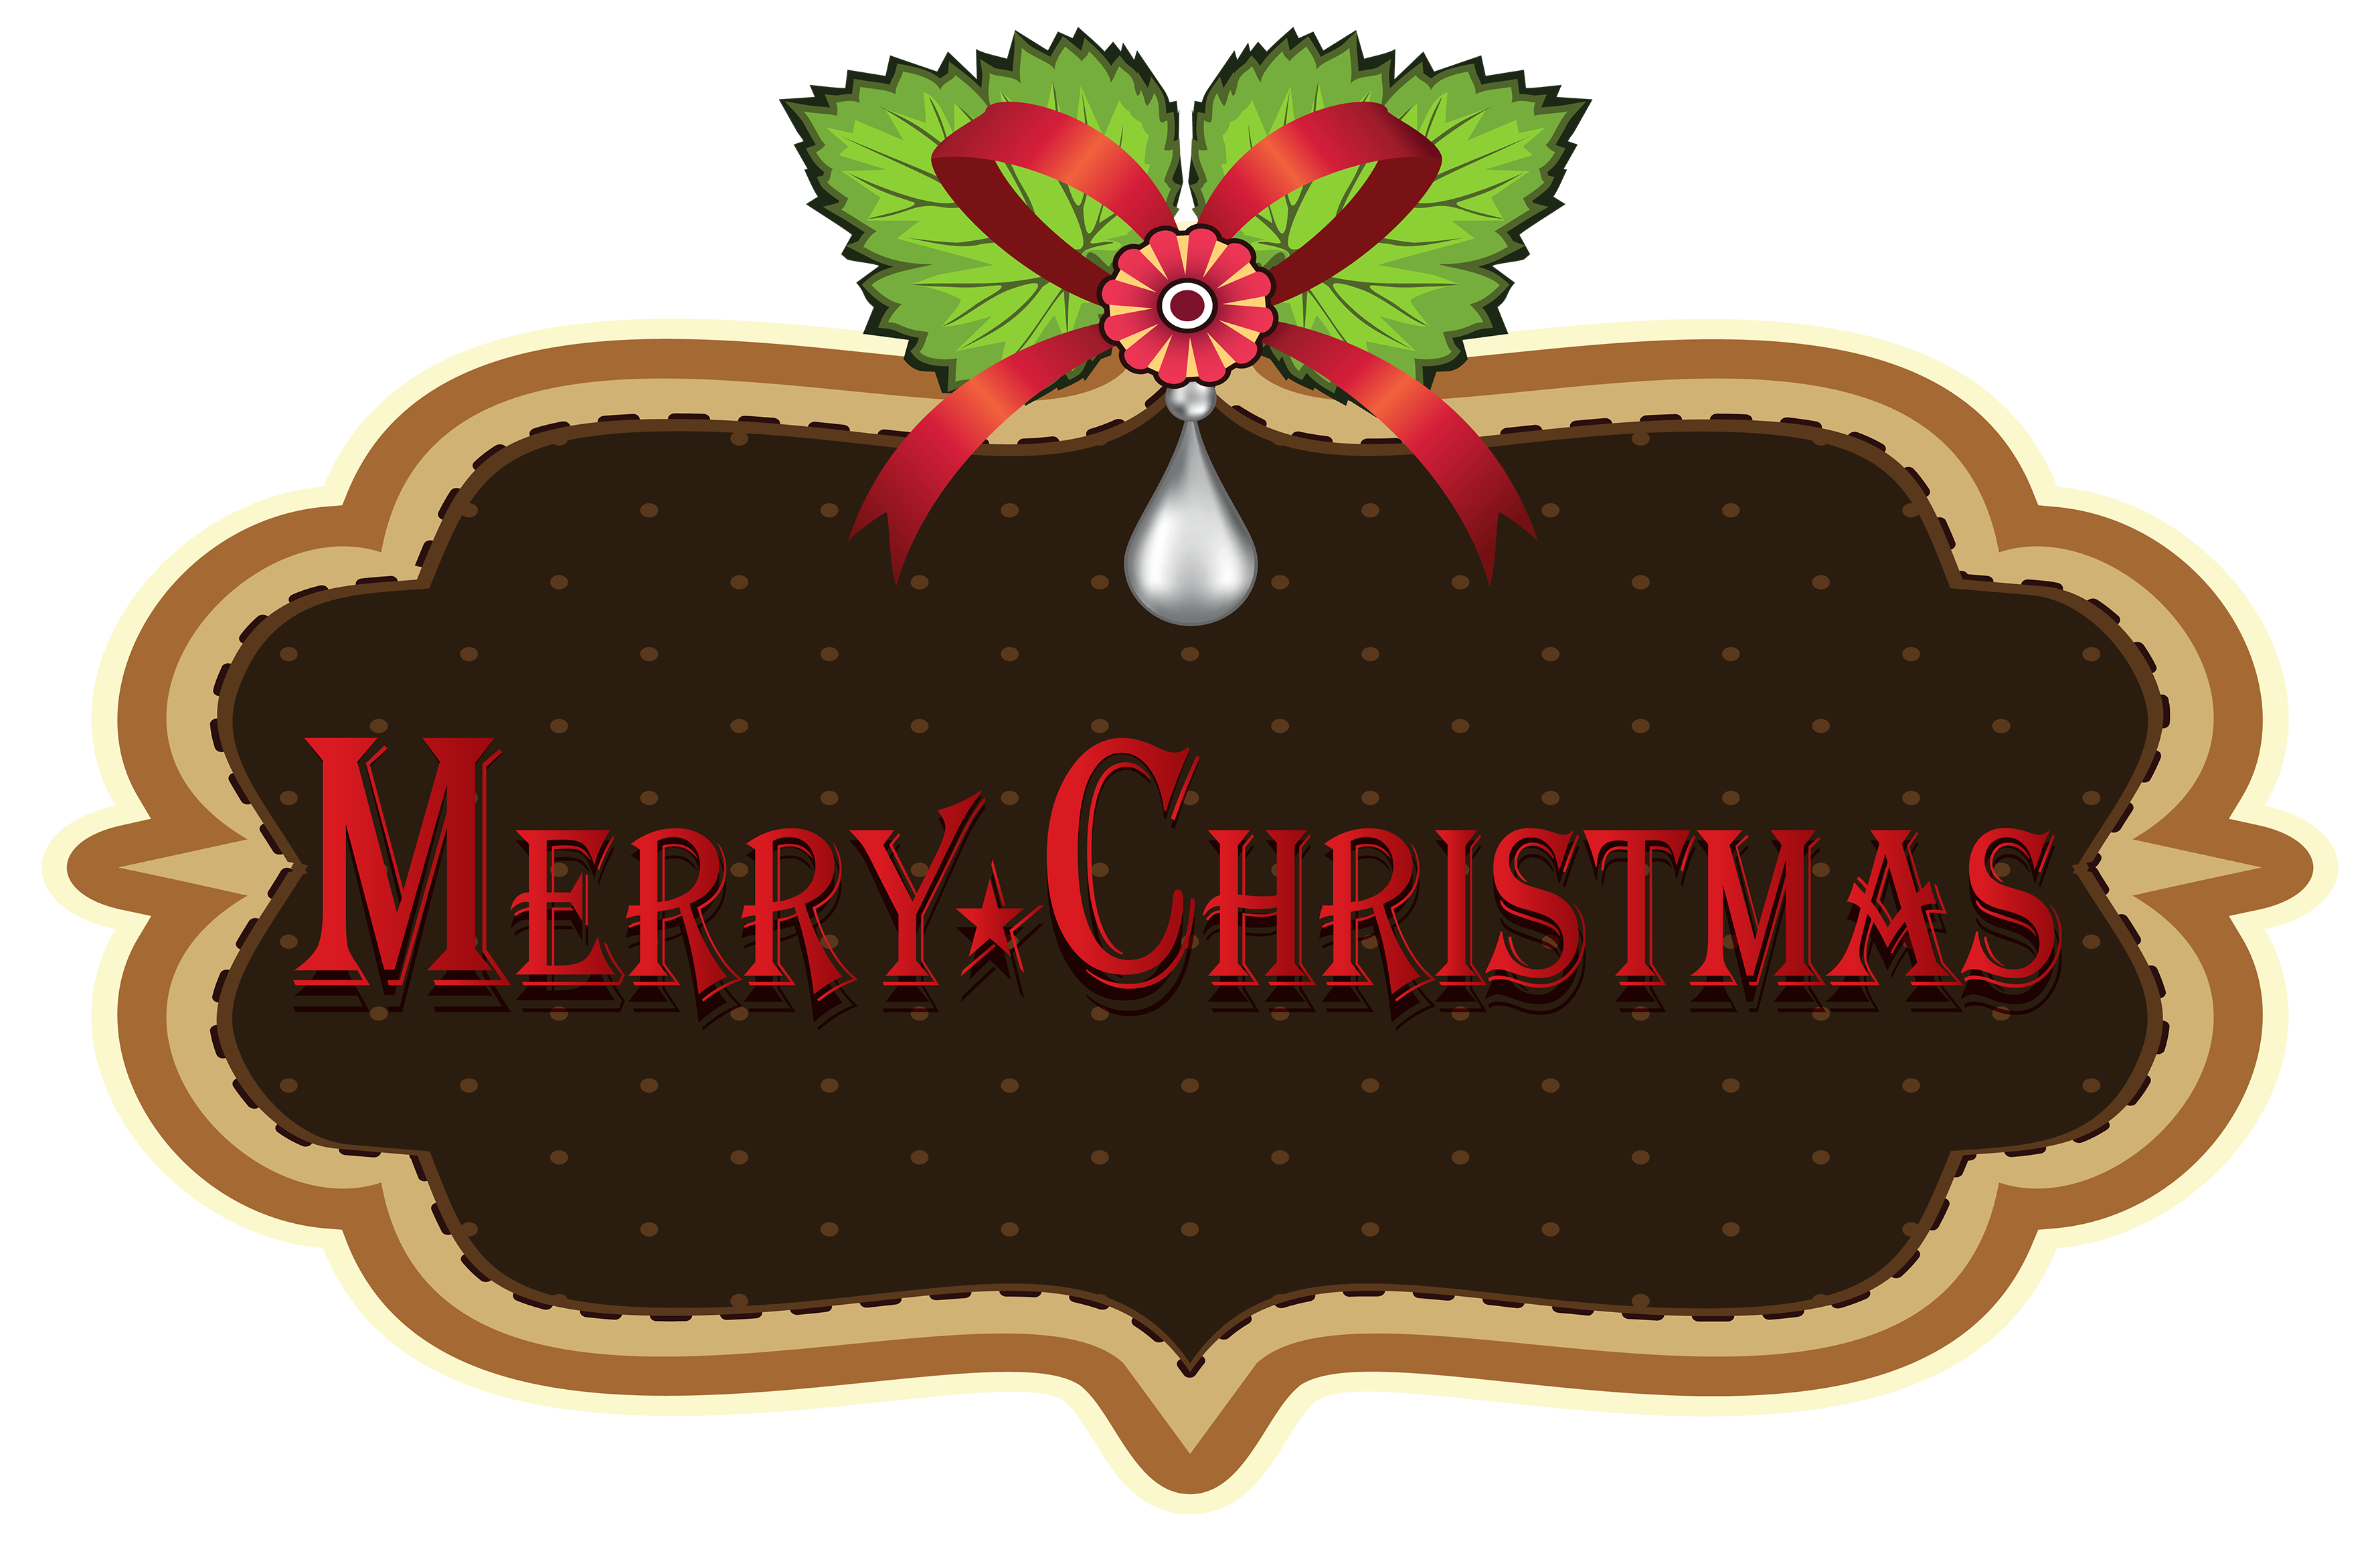 Merry Christmas Label PNG Clipart - Best WEB Clipart